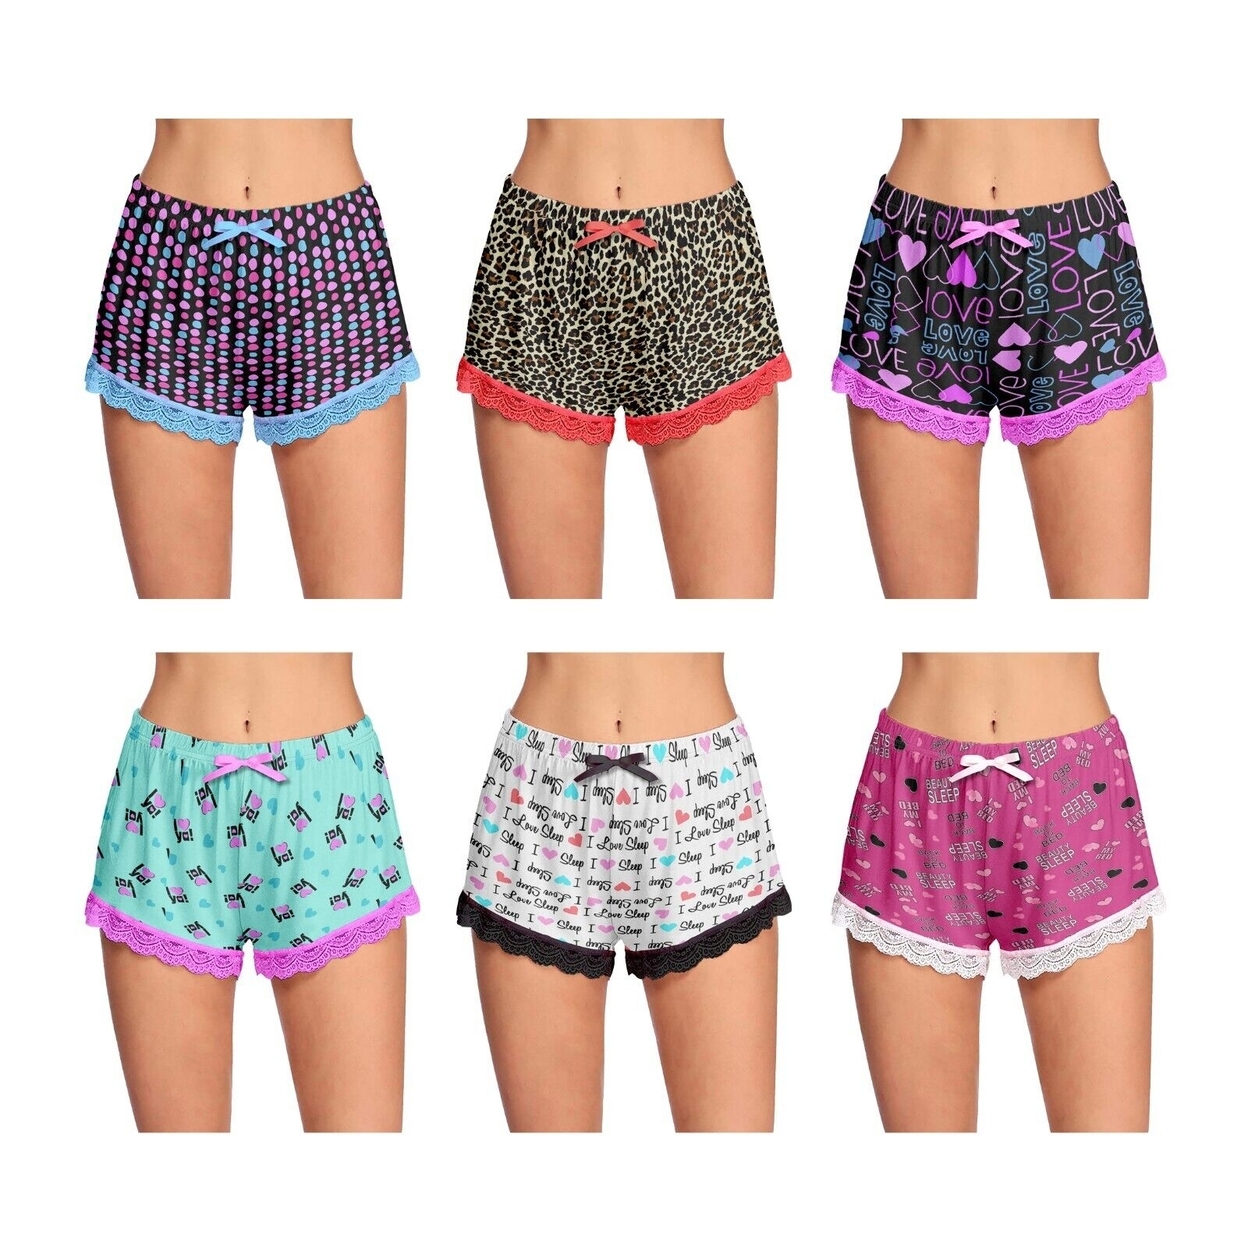 4-Pack: Women's Ultra-Soft Cozy Fun Printed Lace Trim Pajama Lounge Shorts - Large, Shapes